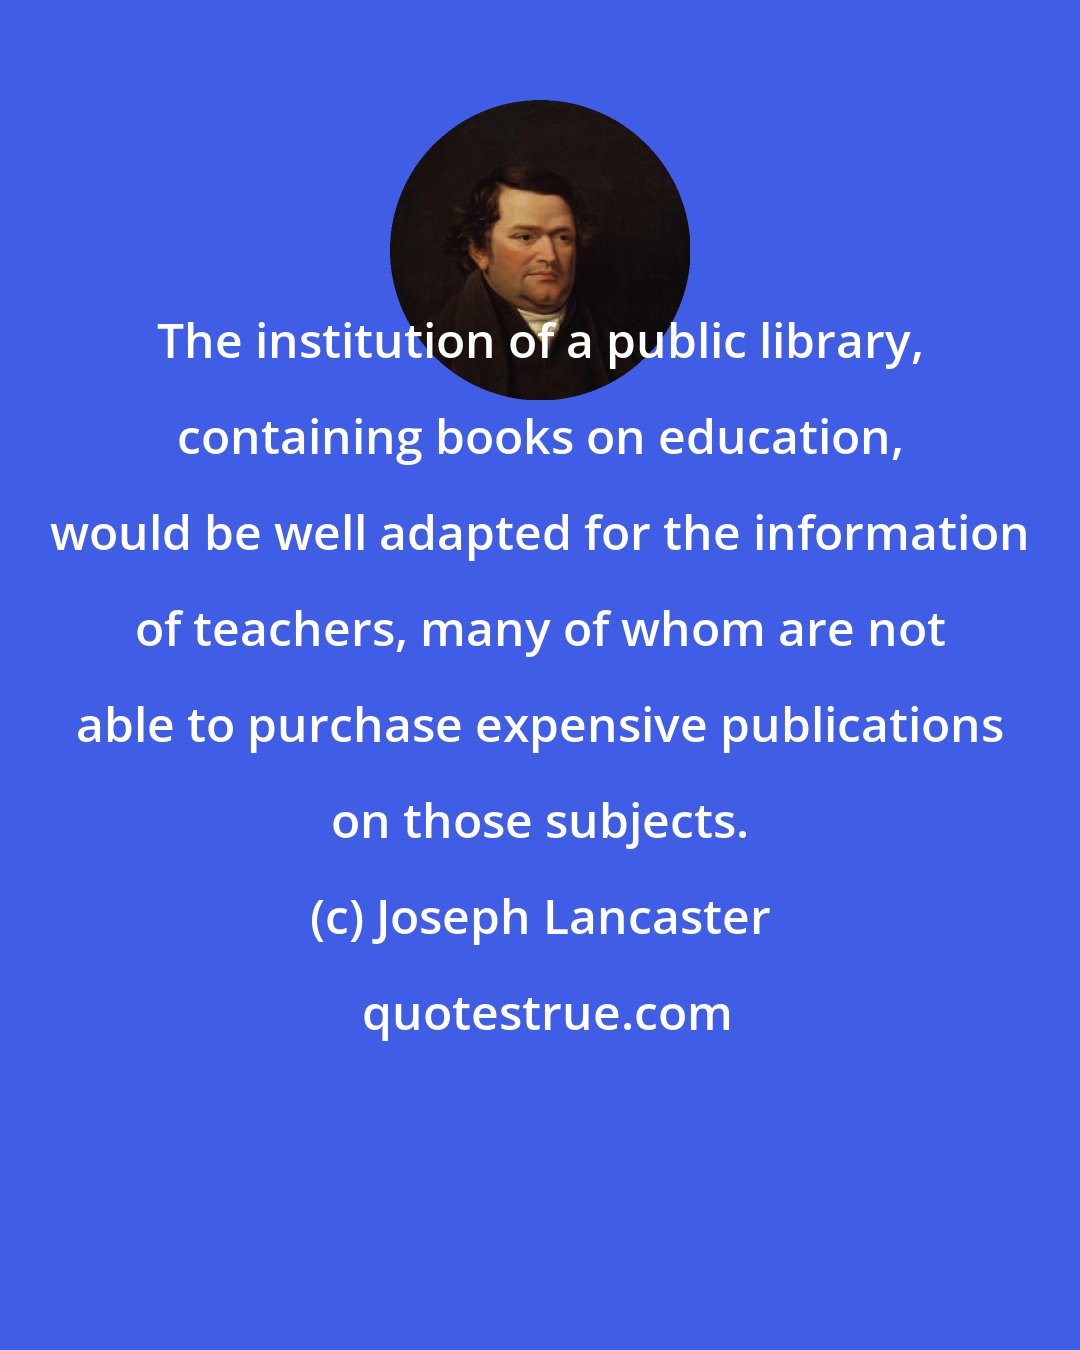 Joseph Lancaster: The institution of a public library, containing books on education, would be well adapted for the information of teachers, many of whom are not able to purchase expensive publications on those subjects.